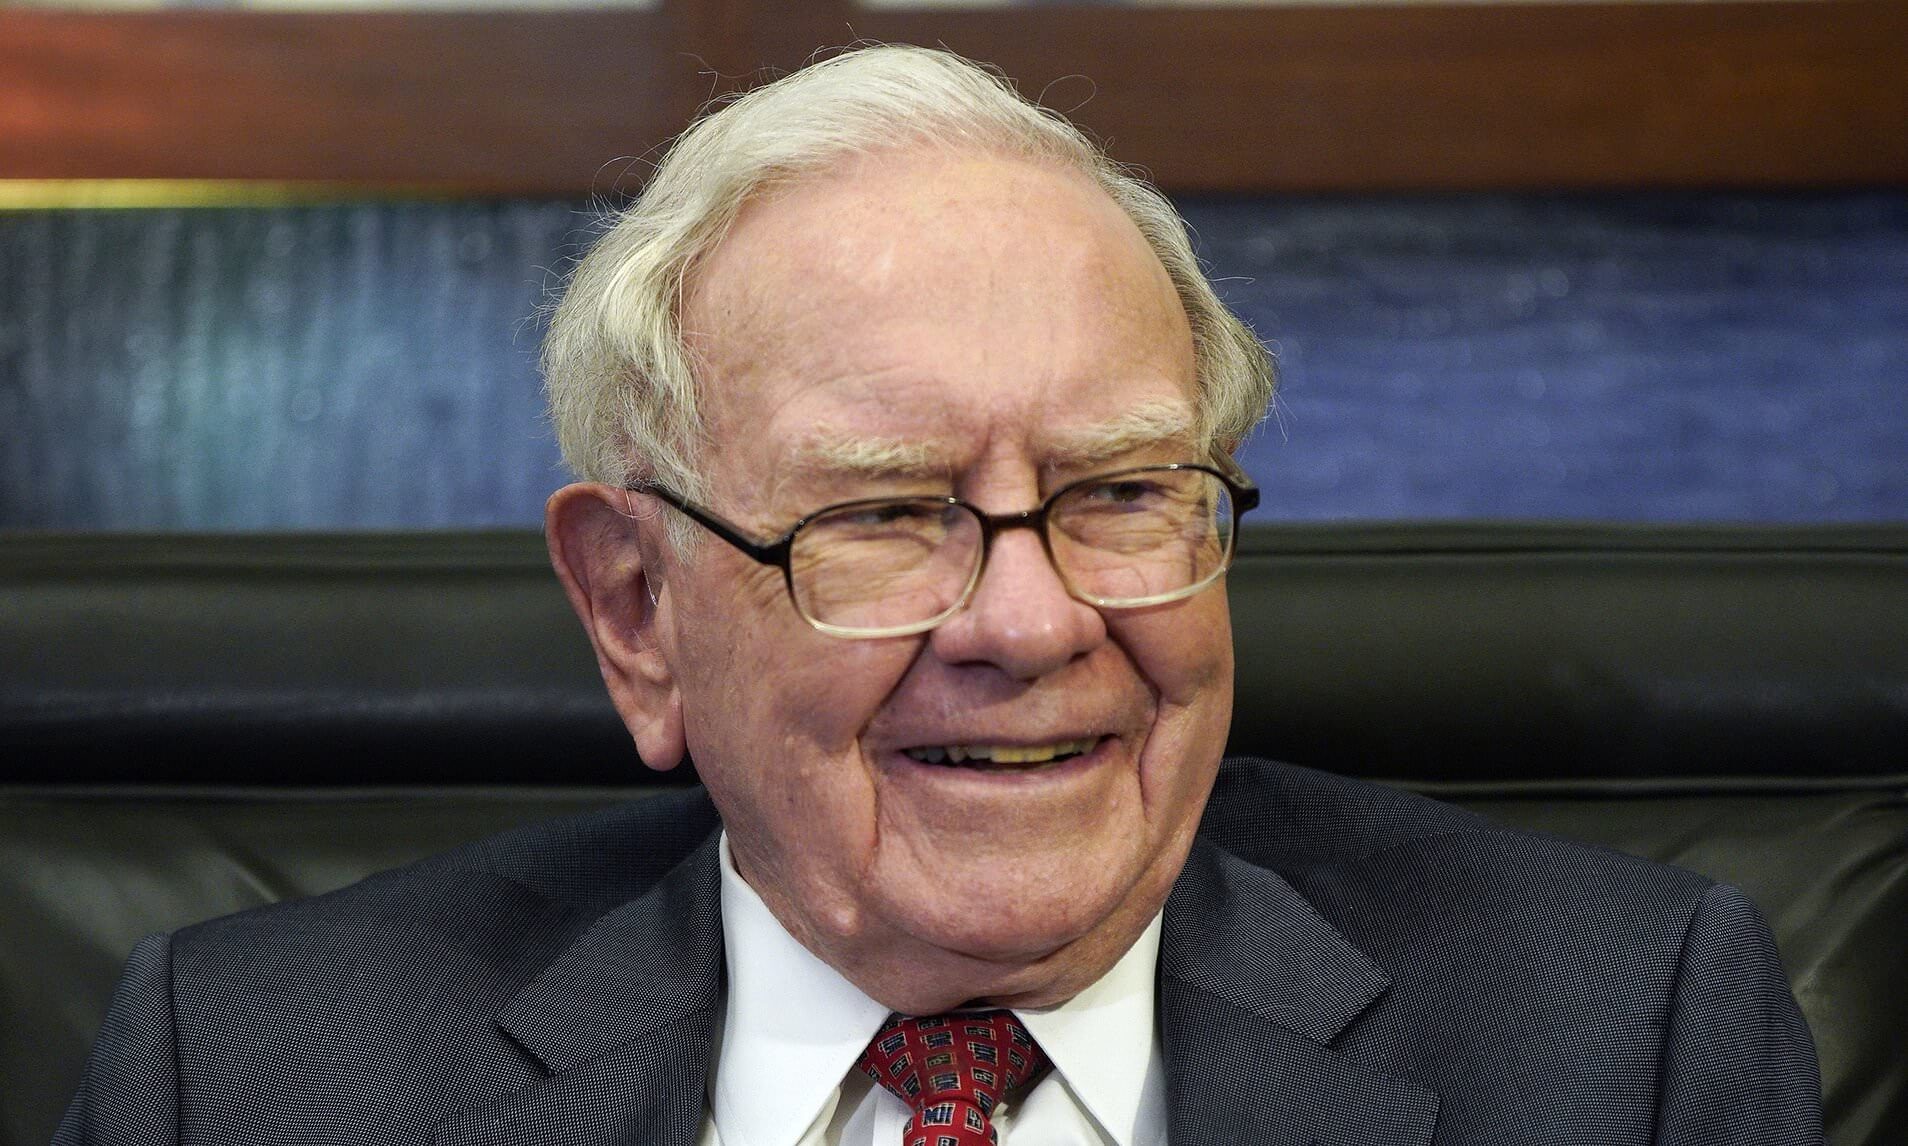 Warren Buffett wouldn't pay $25 for all the Bitcoin in the world, but he does like Activision Blizzard